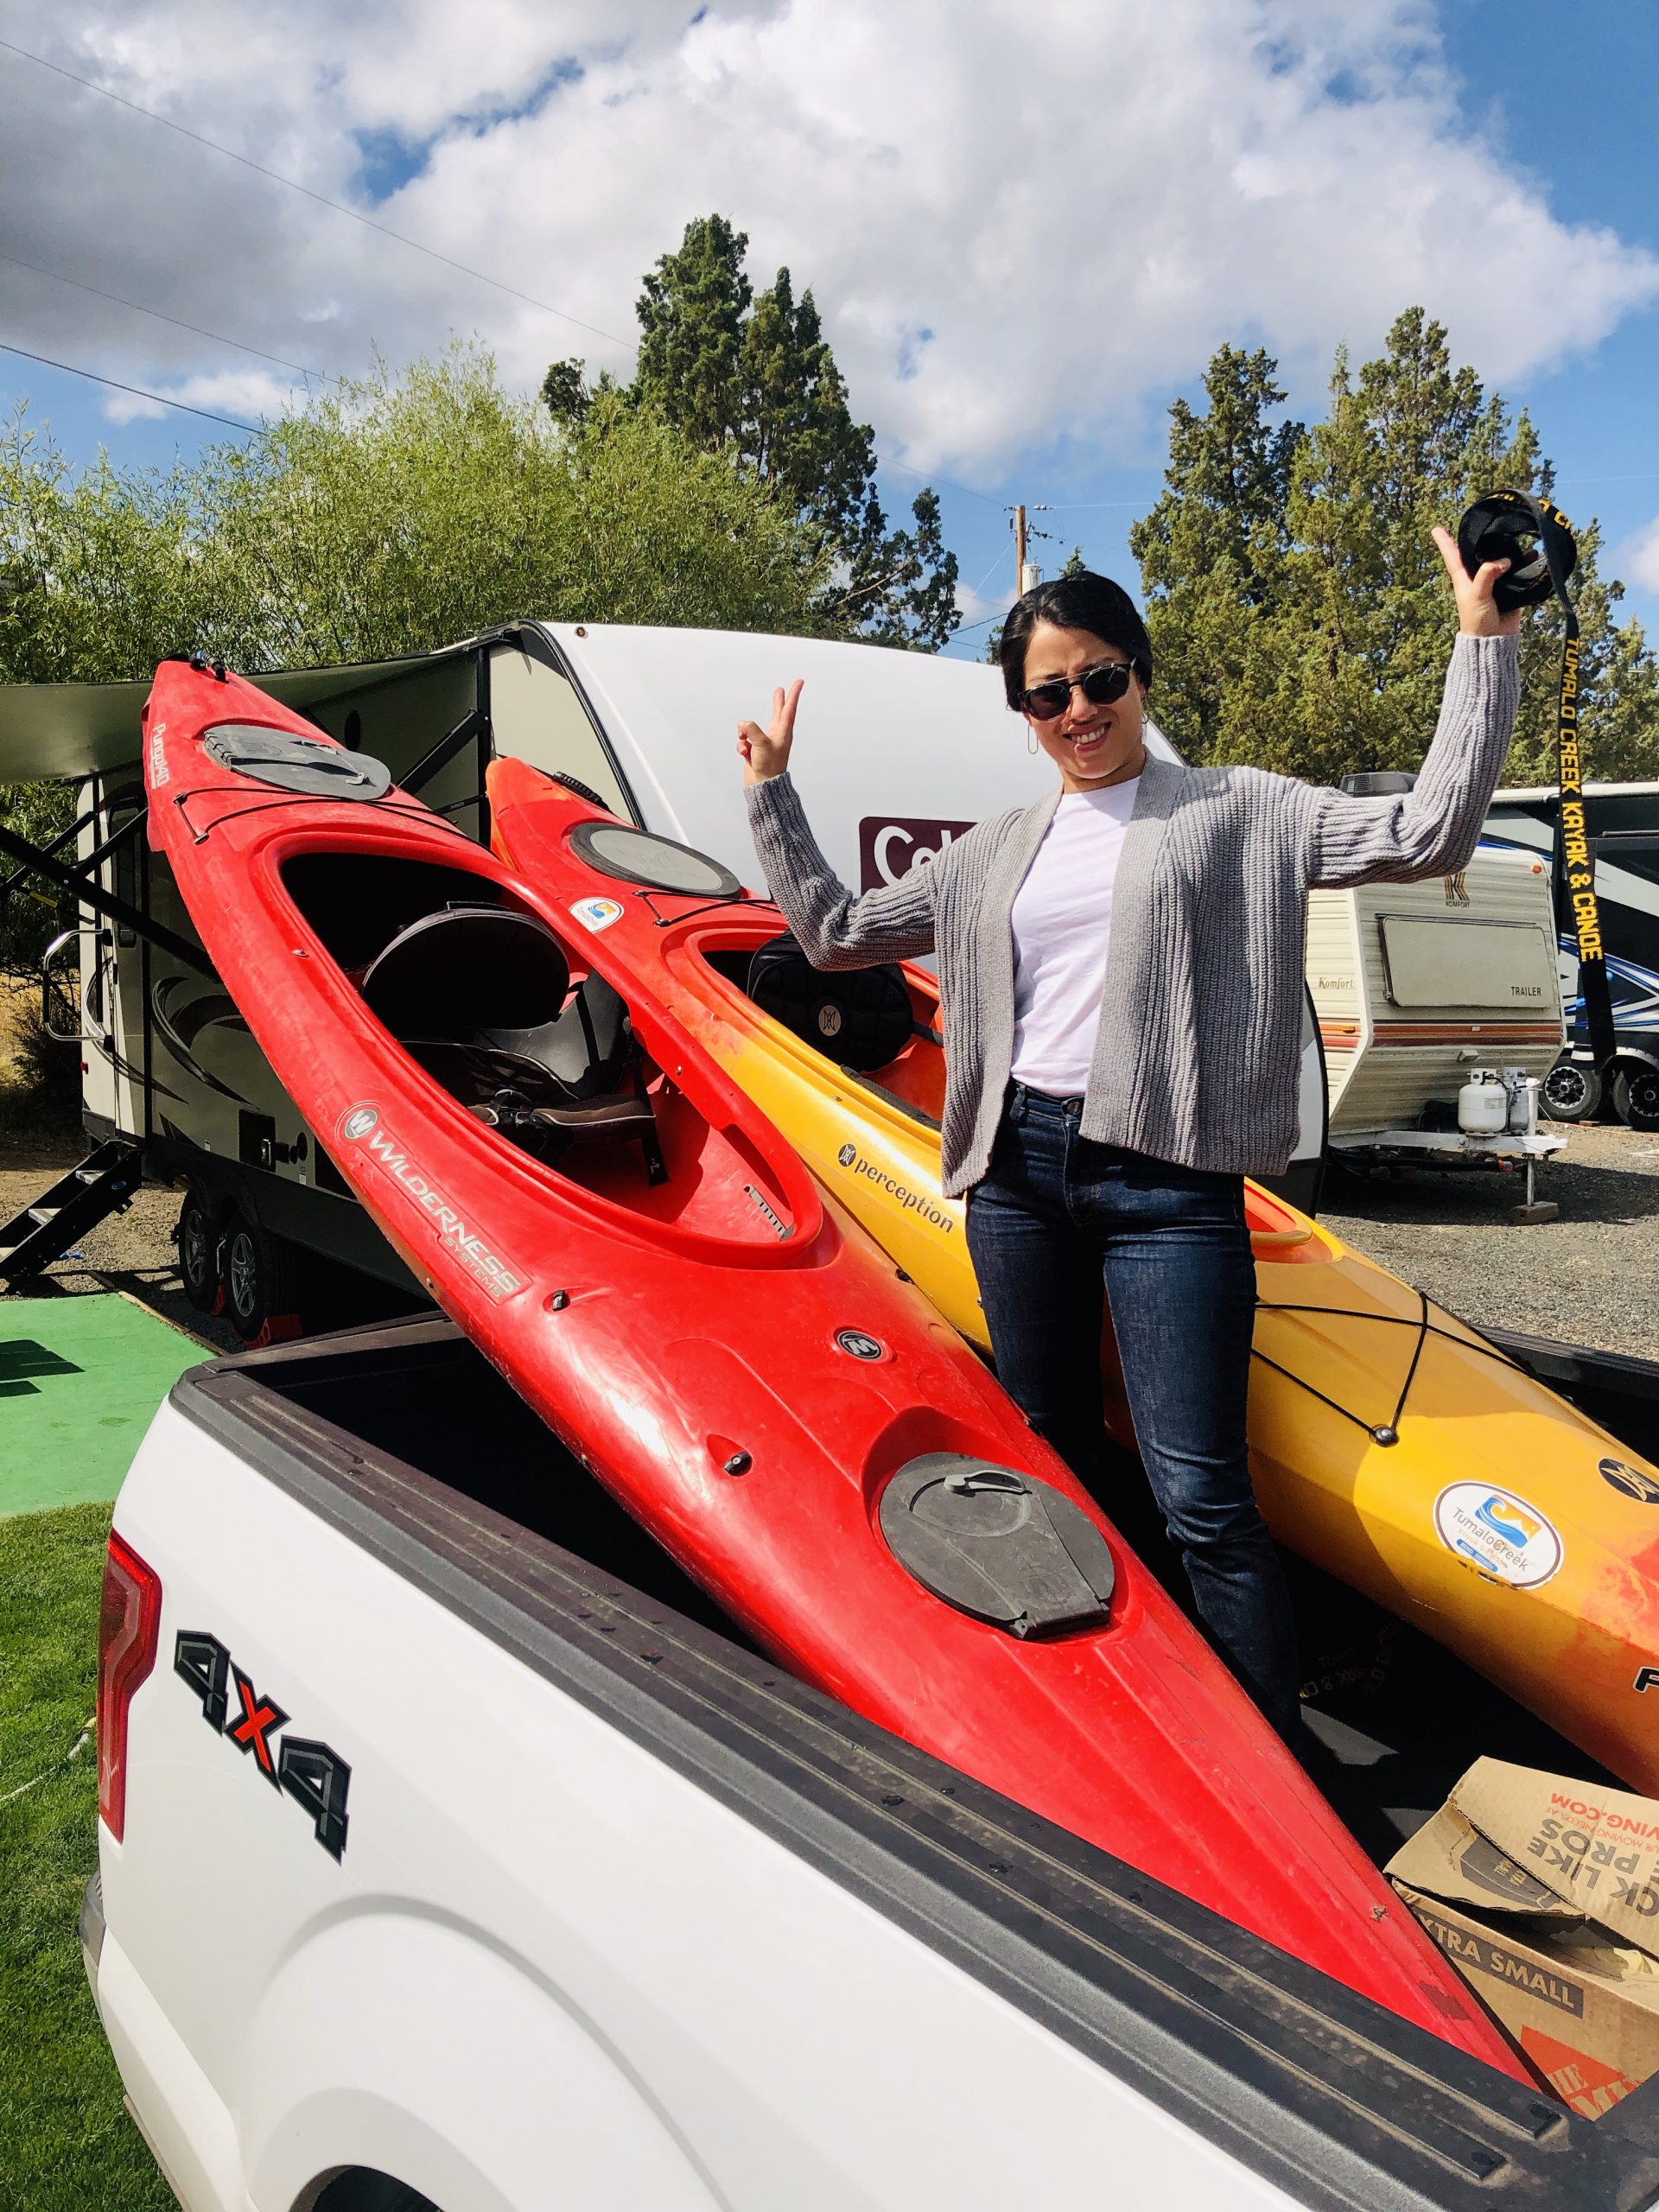 Maribeth in the truck bed with our new kayaks!